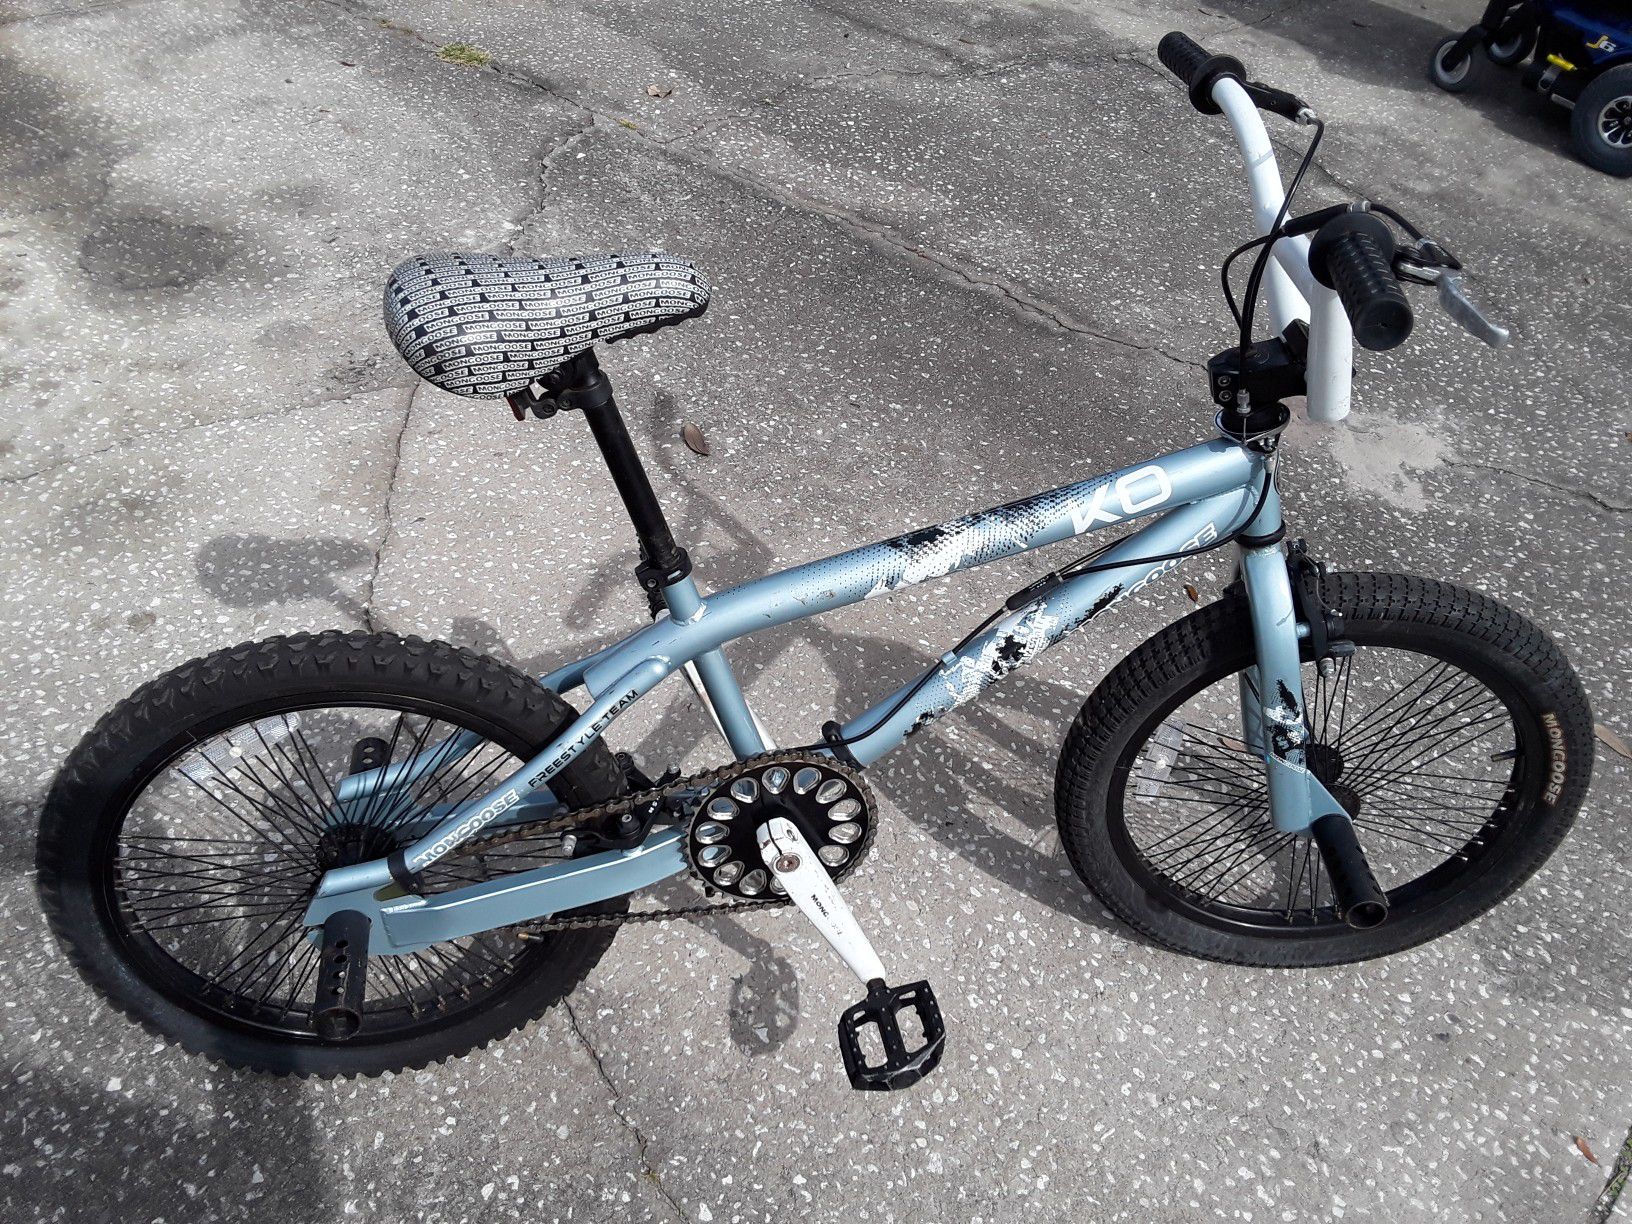 Mongoose KO Freestyle BMX bike, like new, with 20" tires. $80 firm.